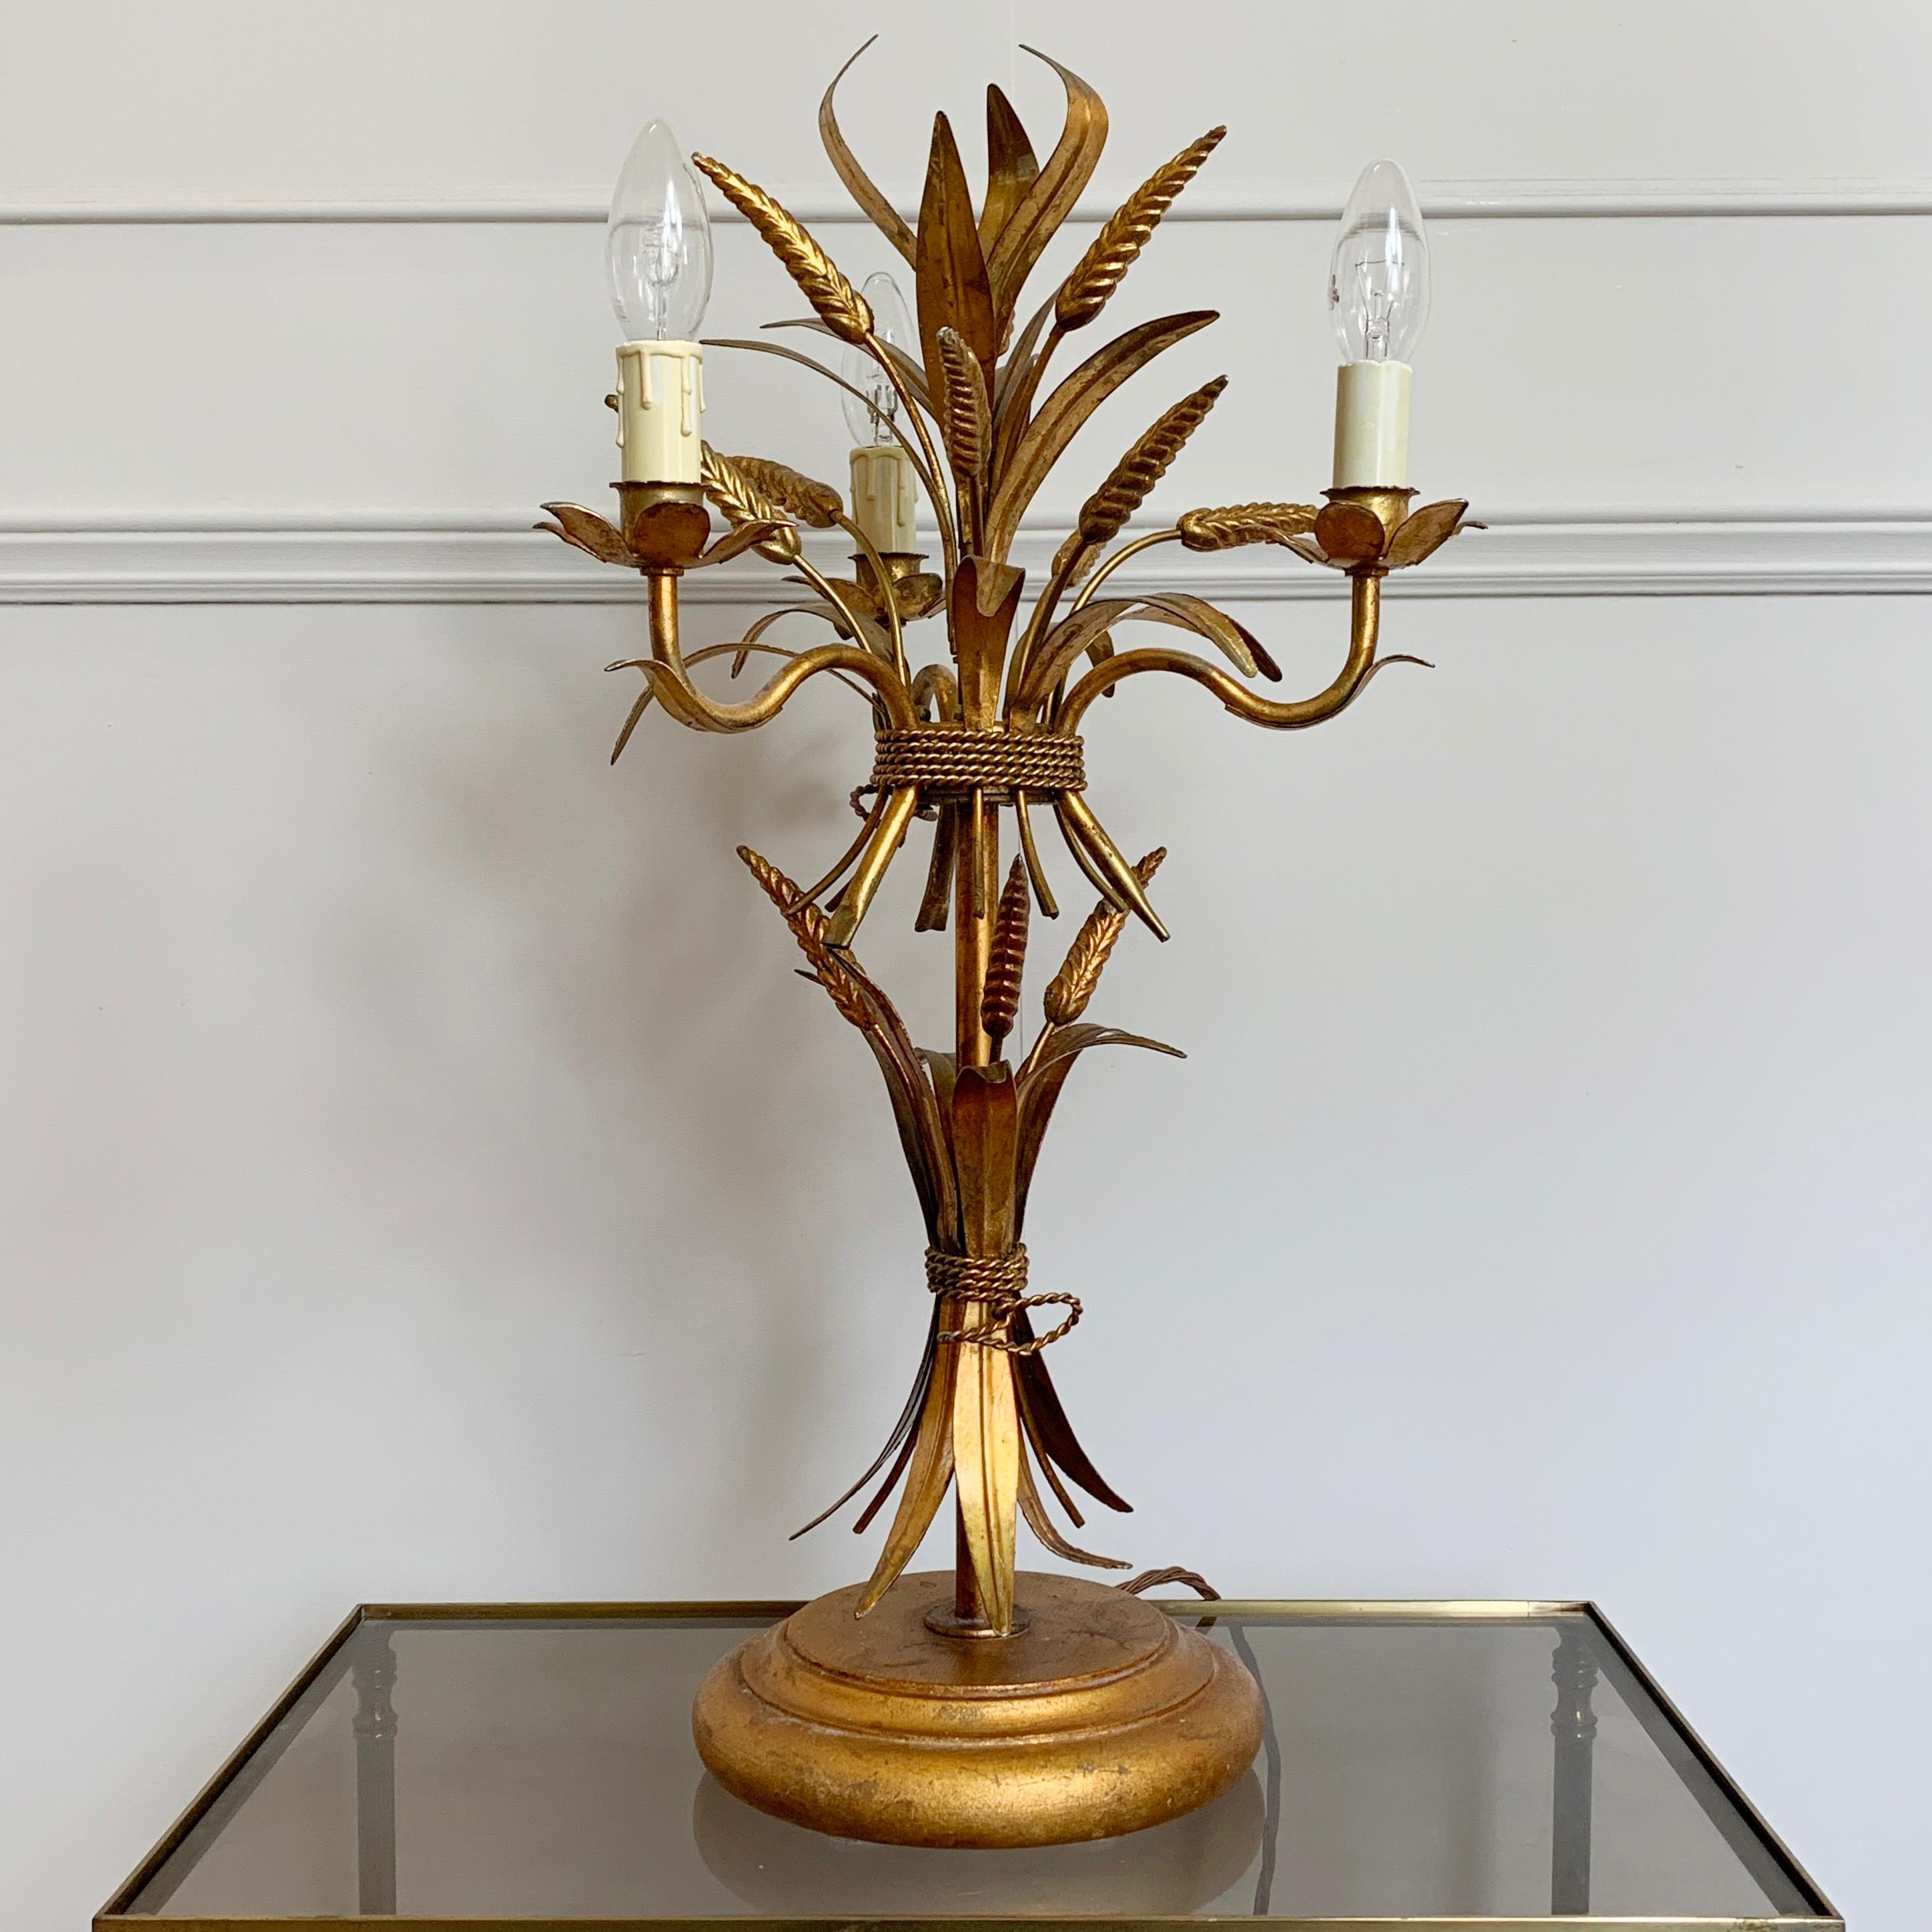 Hans Kögl wheat sheaf table lamp, circa 1970s
Statement wheatsheaf and gilt leaf lamp by Hans Kögl
Measures: 64cm height

There is a long lead with inline switch for ease of use
3 lamp holders with faux candle covers, e14 lamp holders

The lamp is